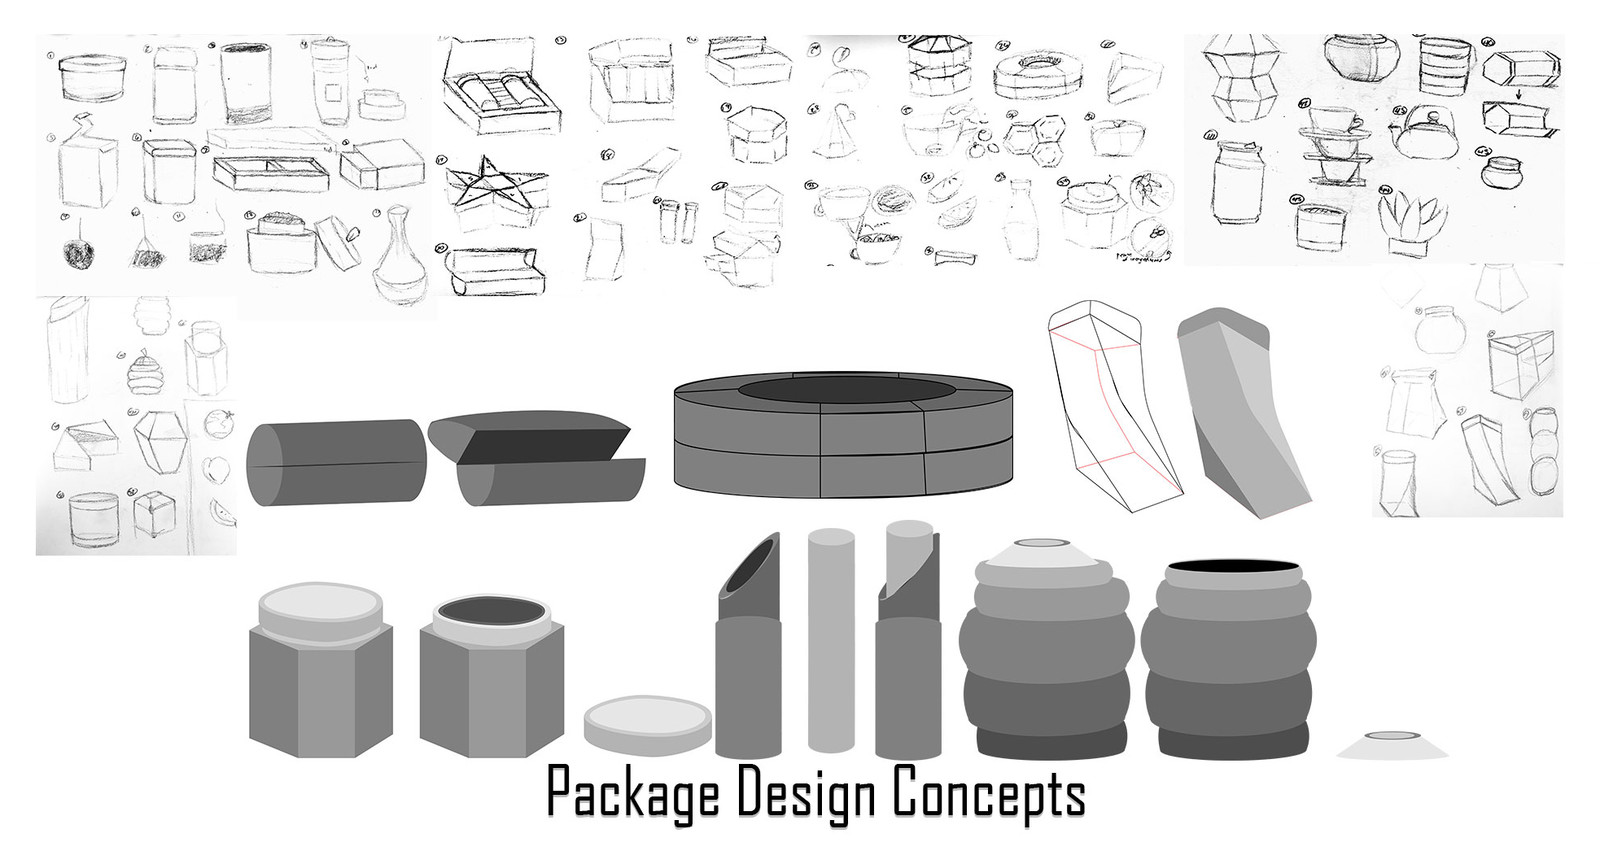 For the package design, I started by coming up with 61 thumbnail sketches of different designs. Then narrowing those thumbnails down to six designs, taking those six and designing them in illustrator, and then finally deciding on a final package design. 